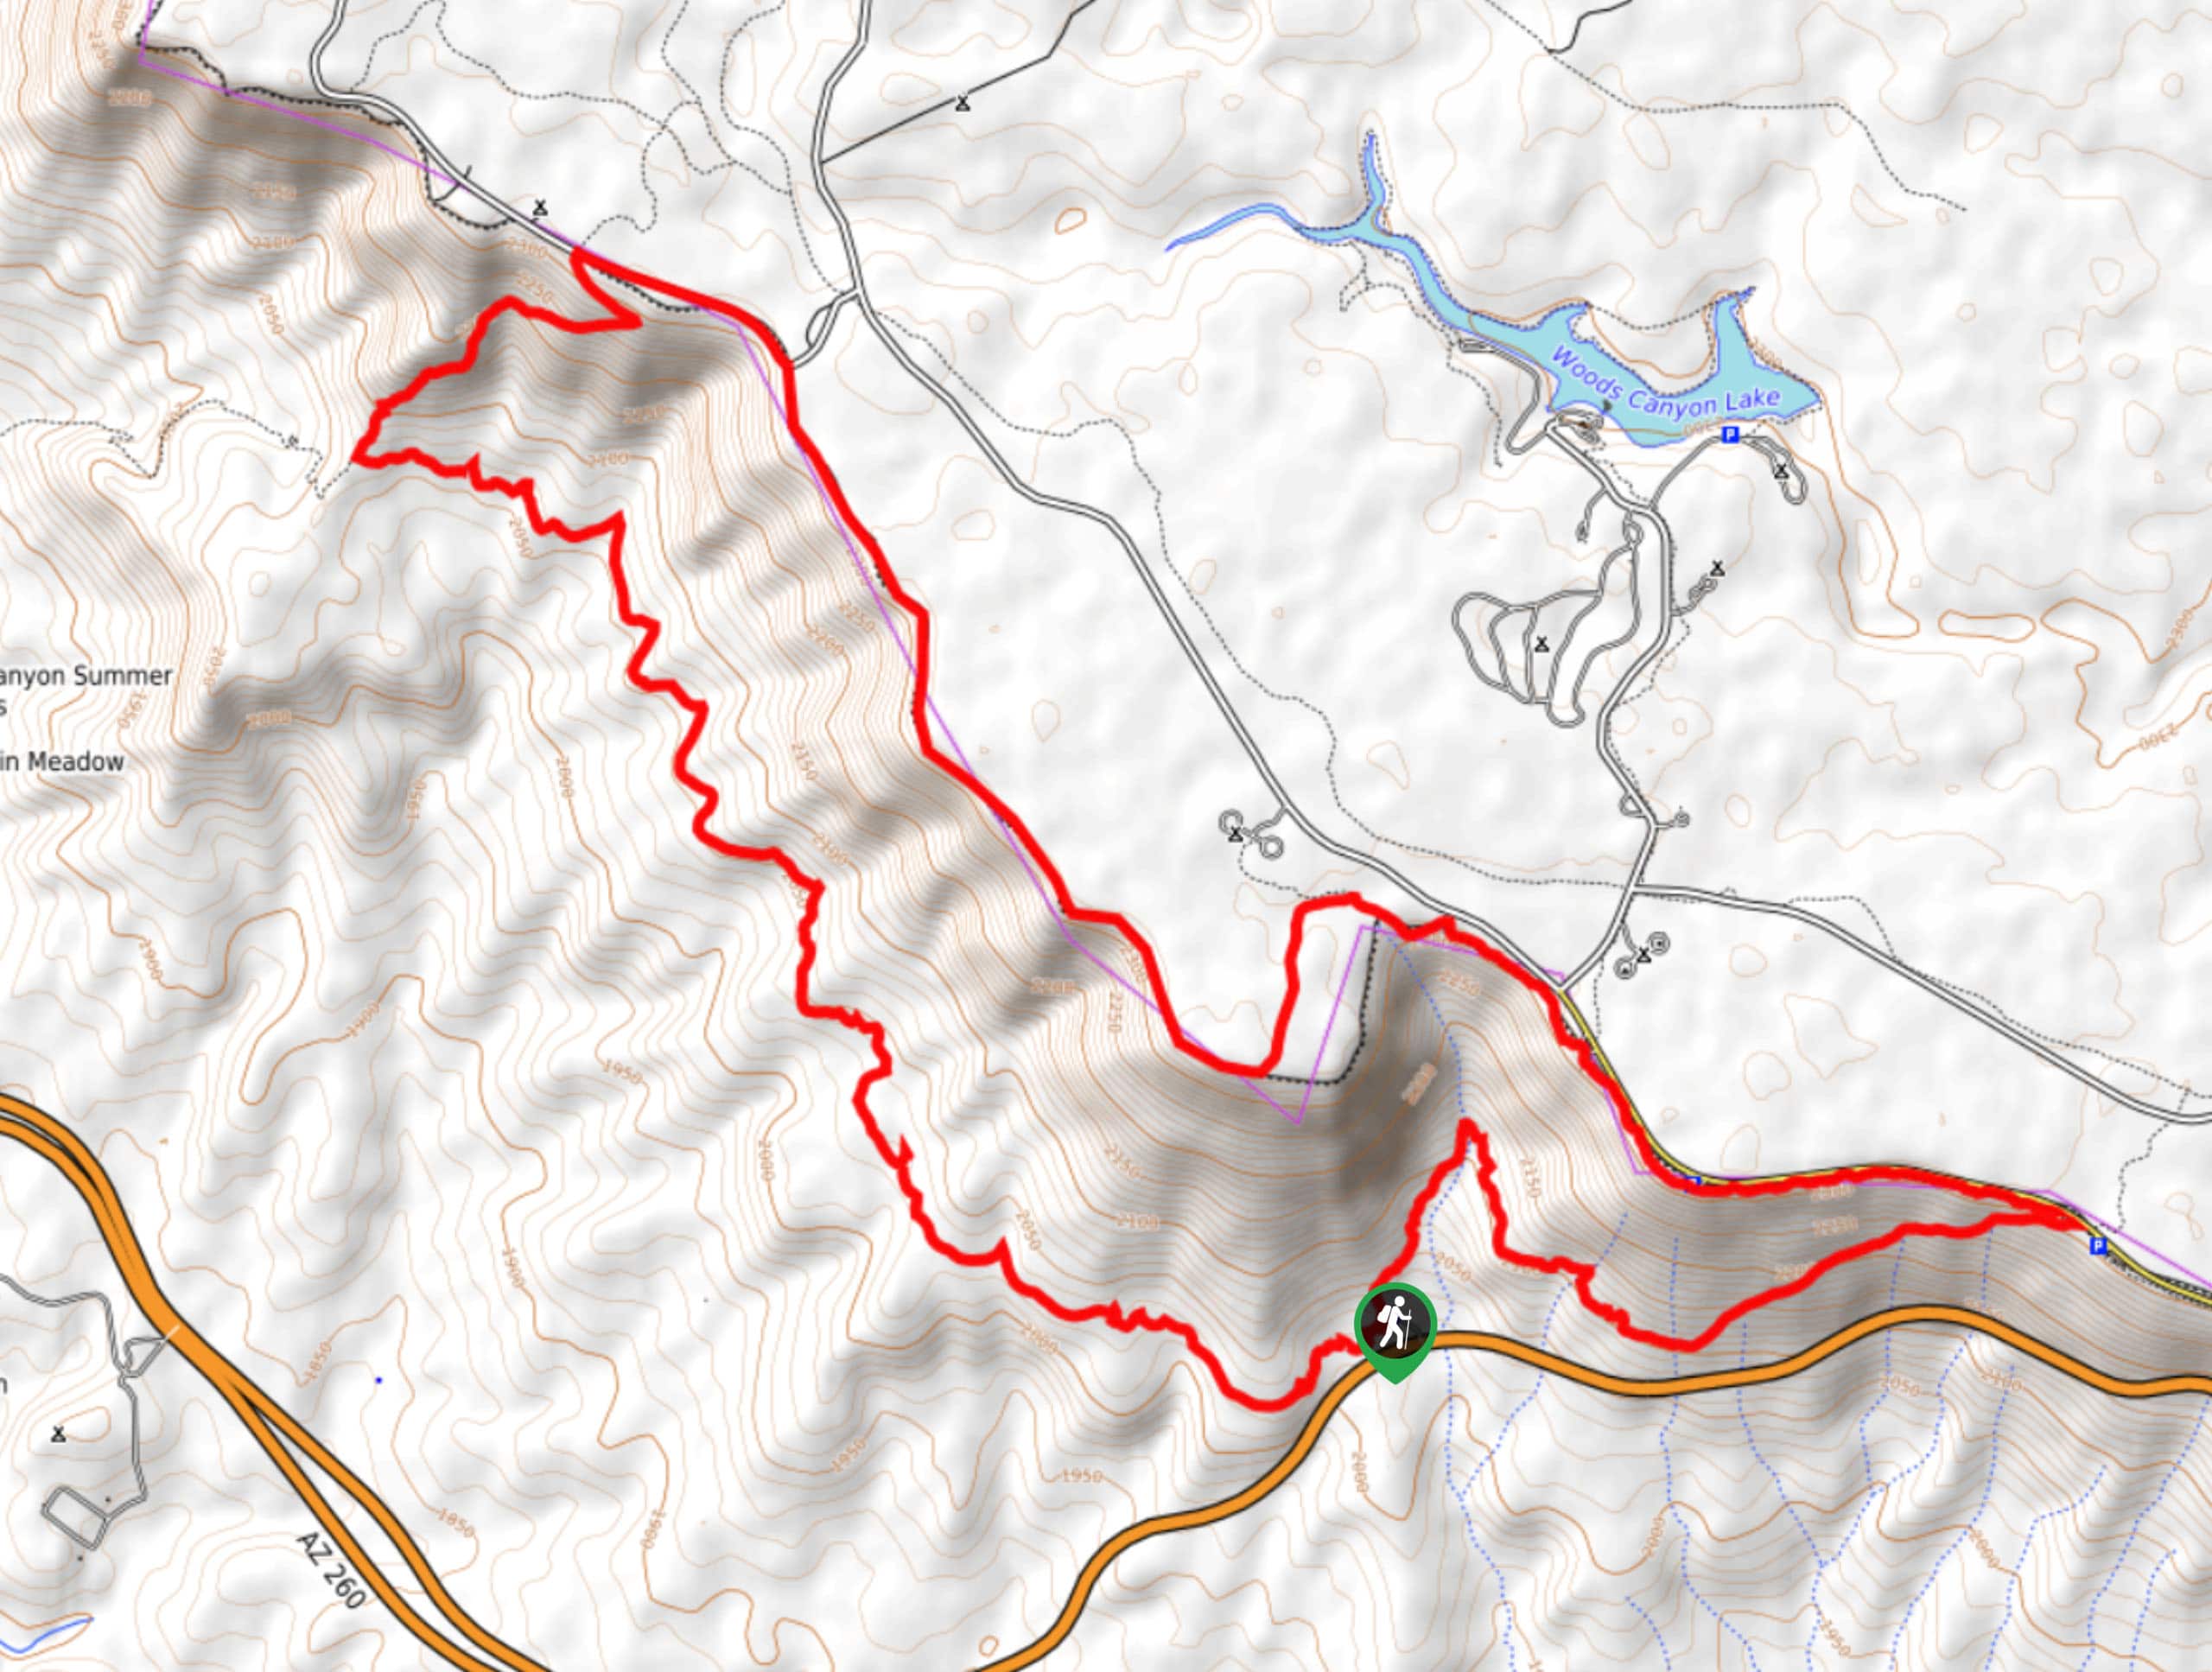 Military Sinkhole, Rim Lakes, and Highline Loop Map